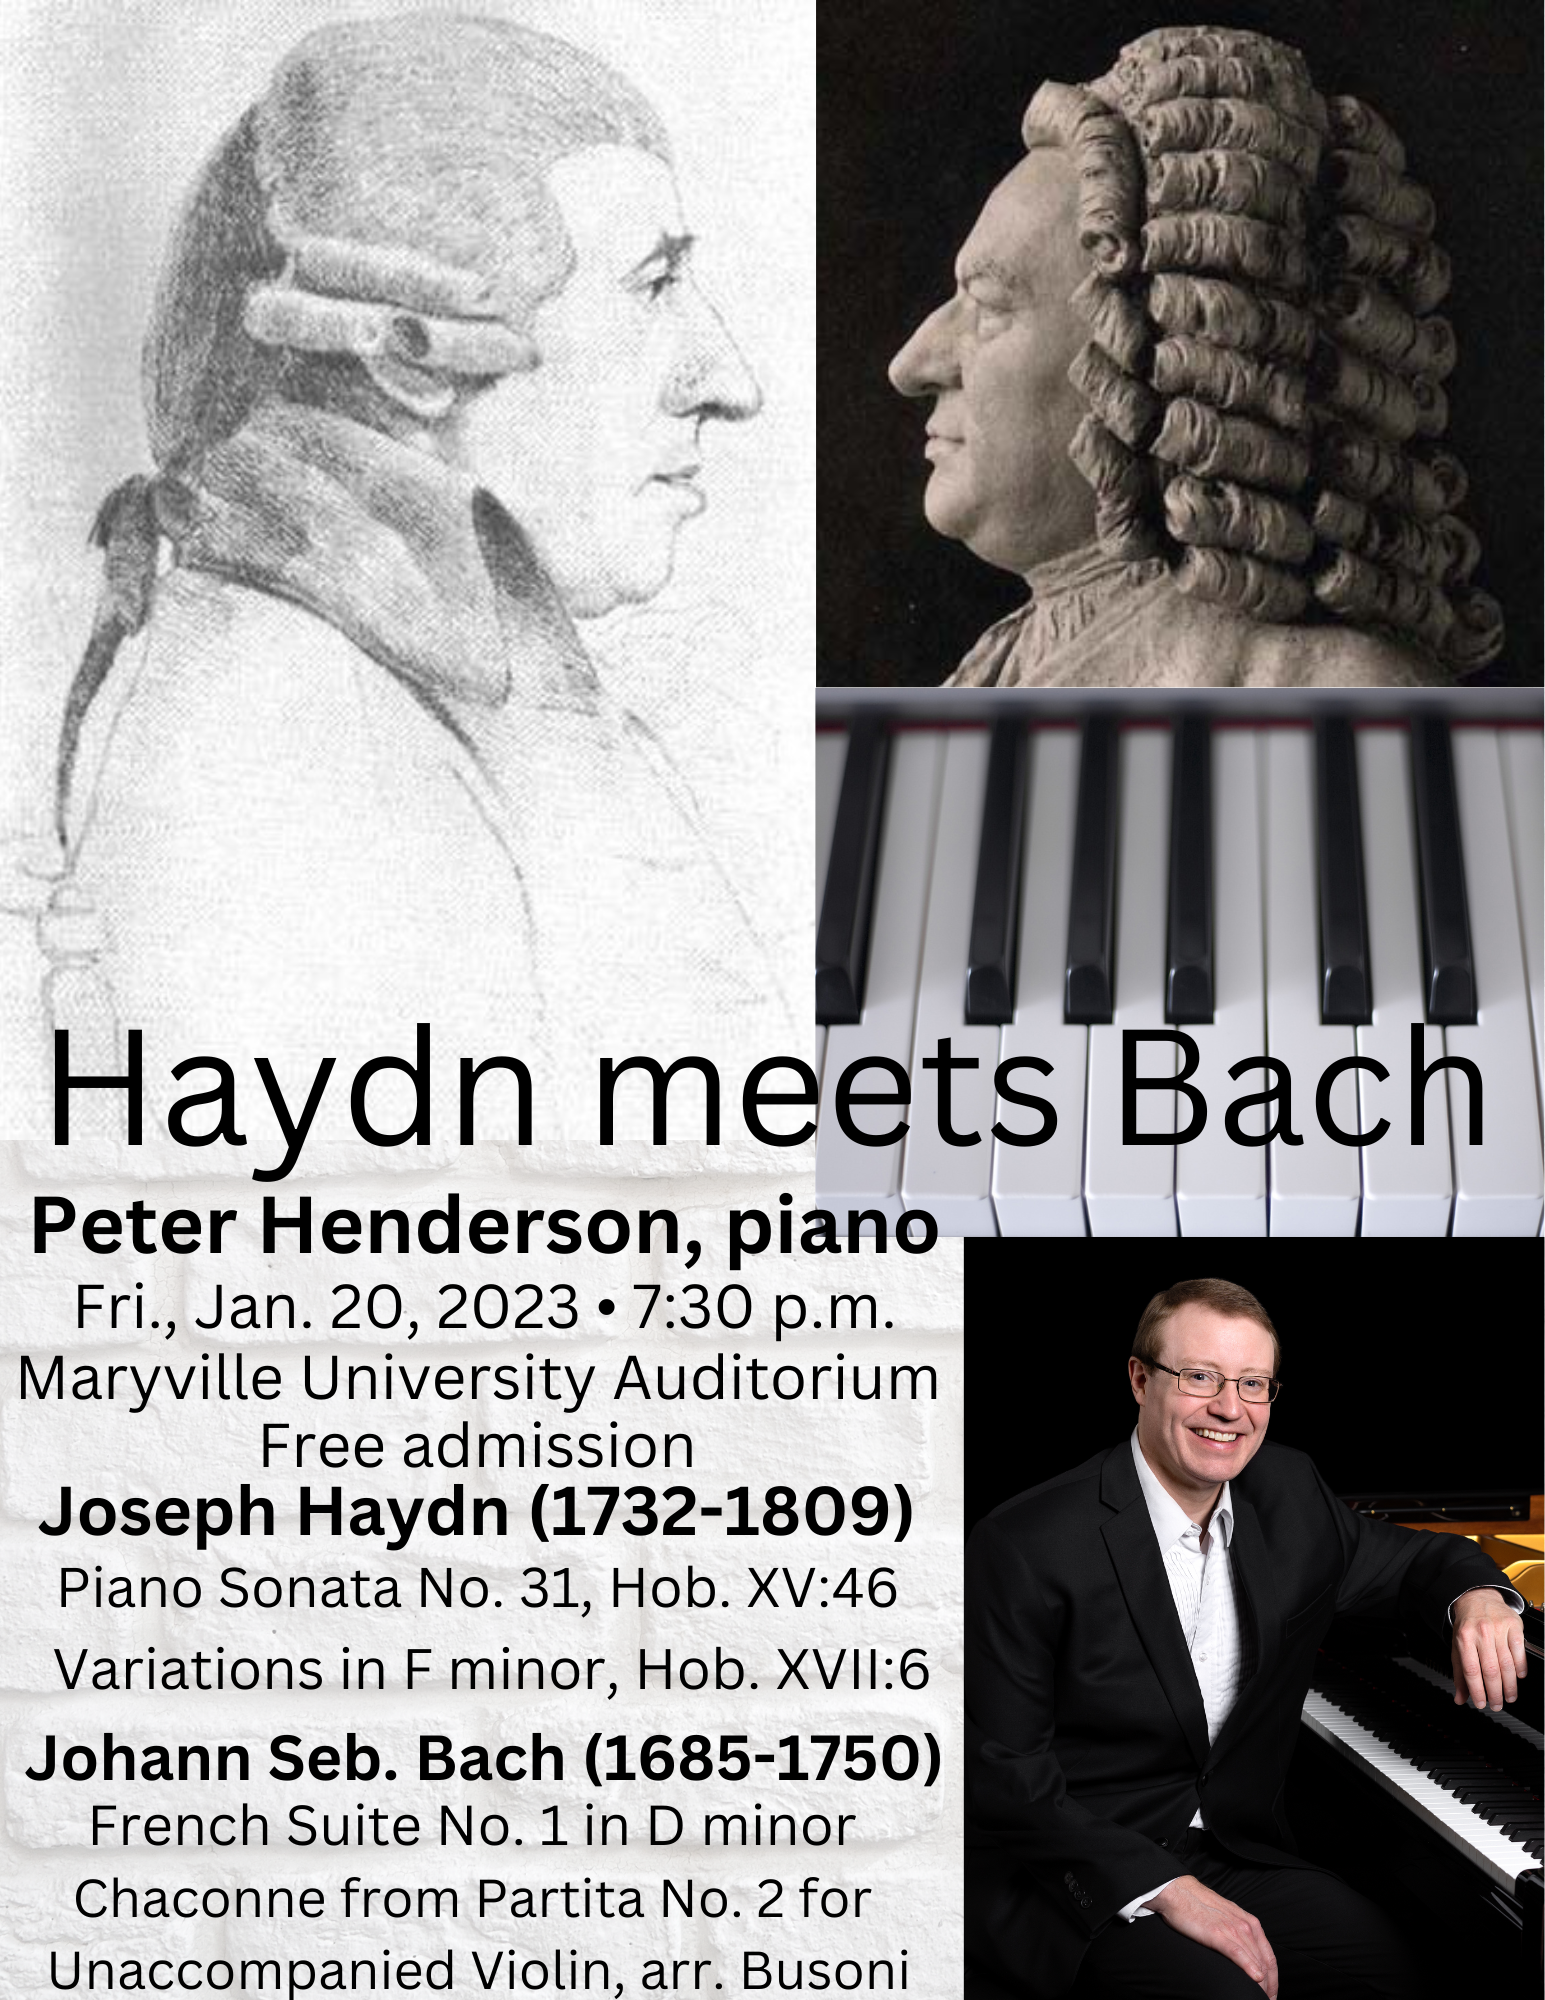 Peter Henderson, piano — Haydn meets Bach — Jan. 20, 2023 @ 7:30 p.m., Maryville University Auditorium — Free admission